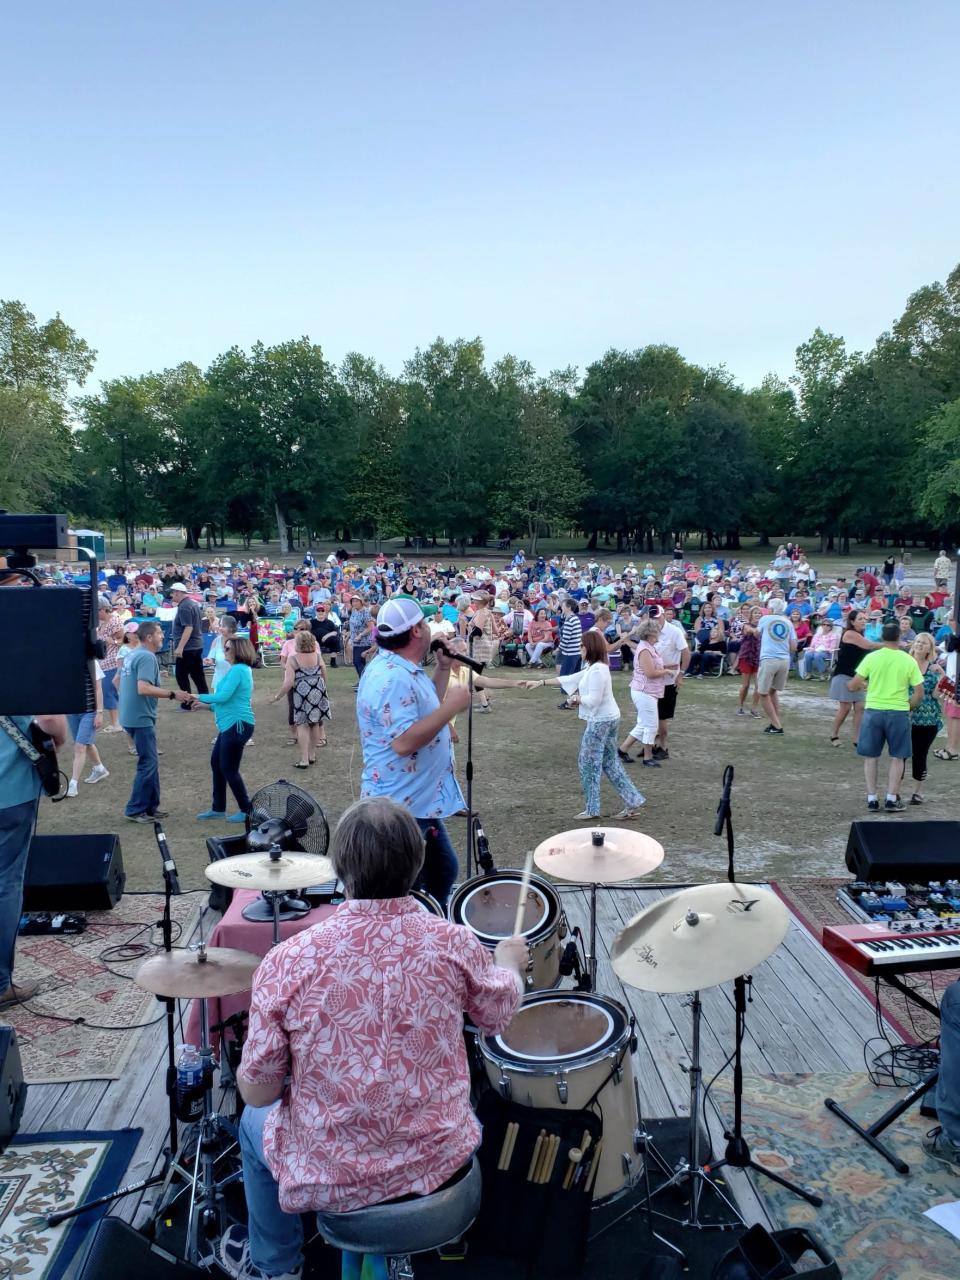 The town of Leland concerts at Founders Park.